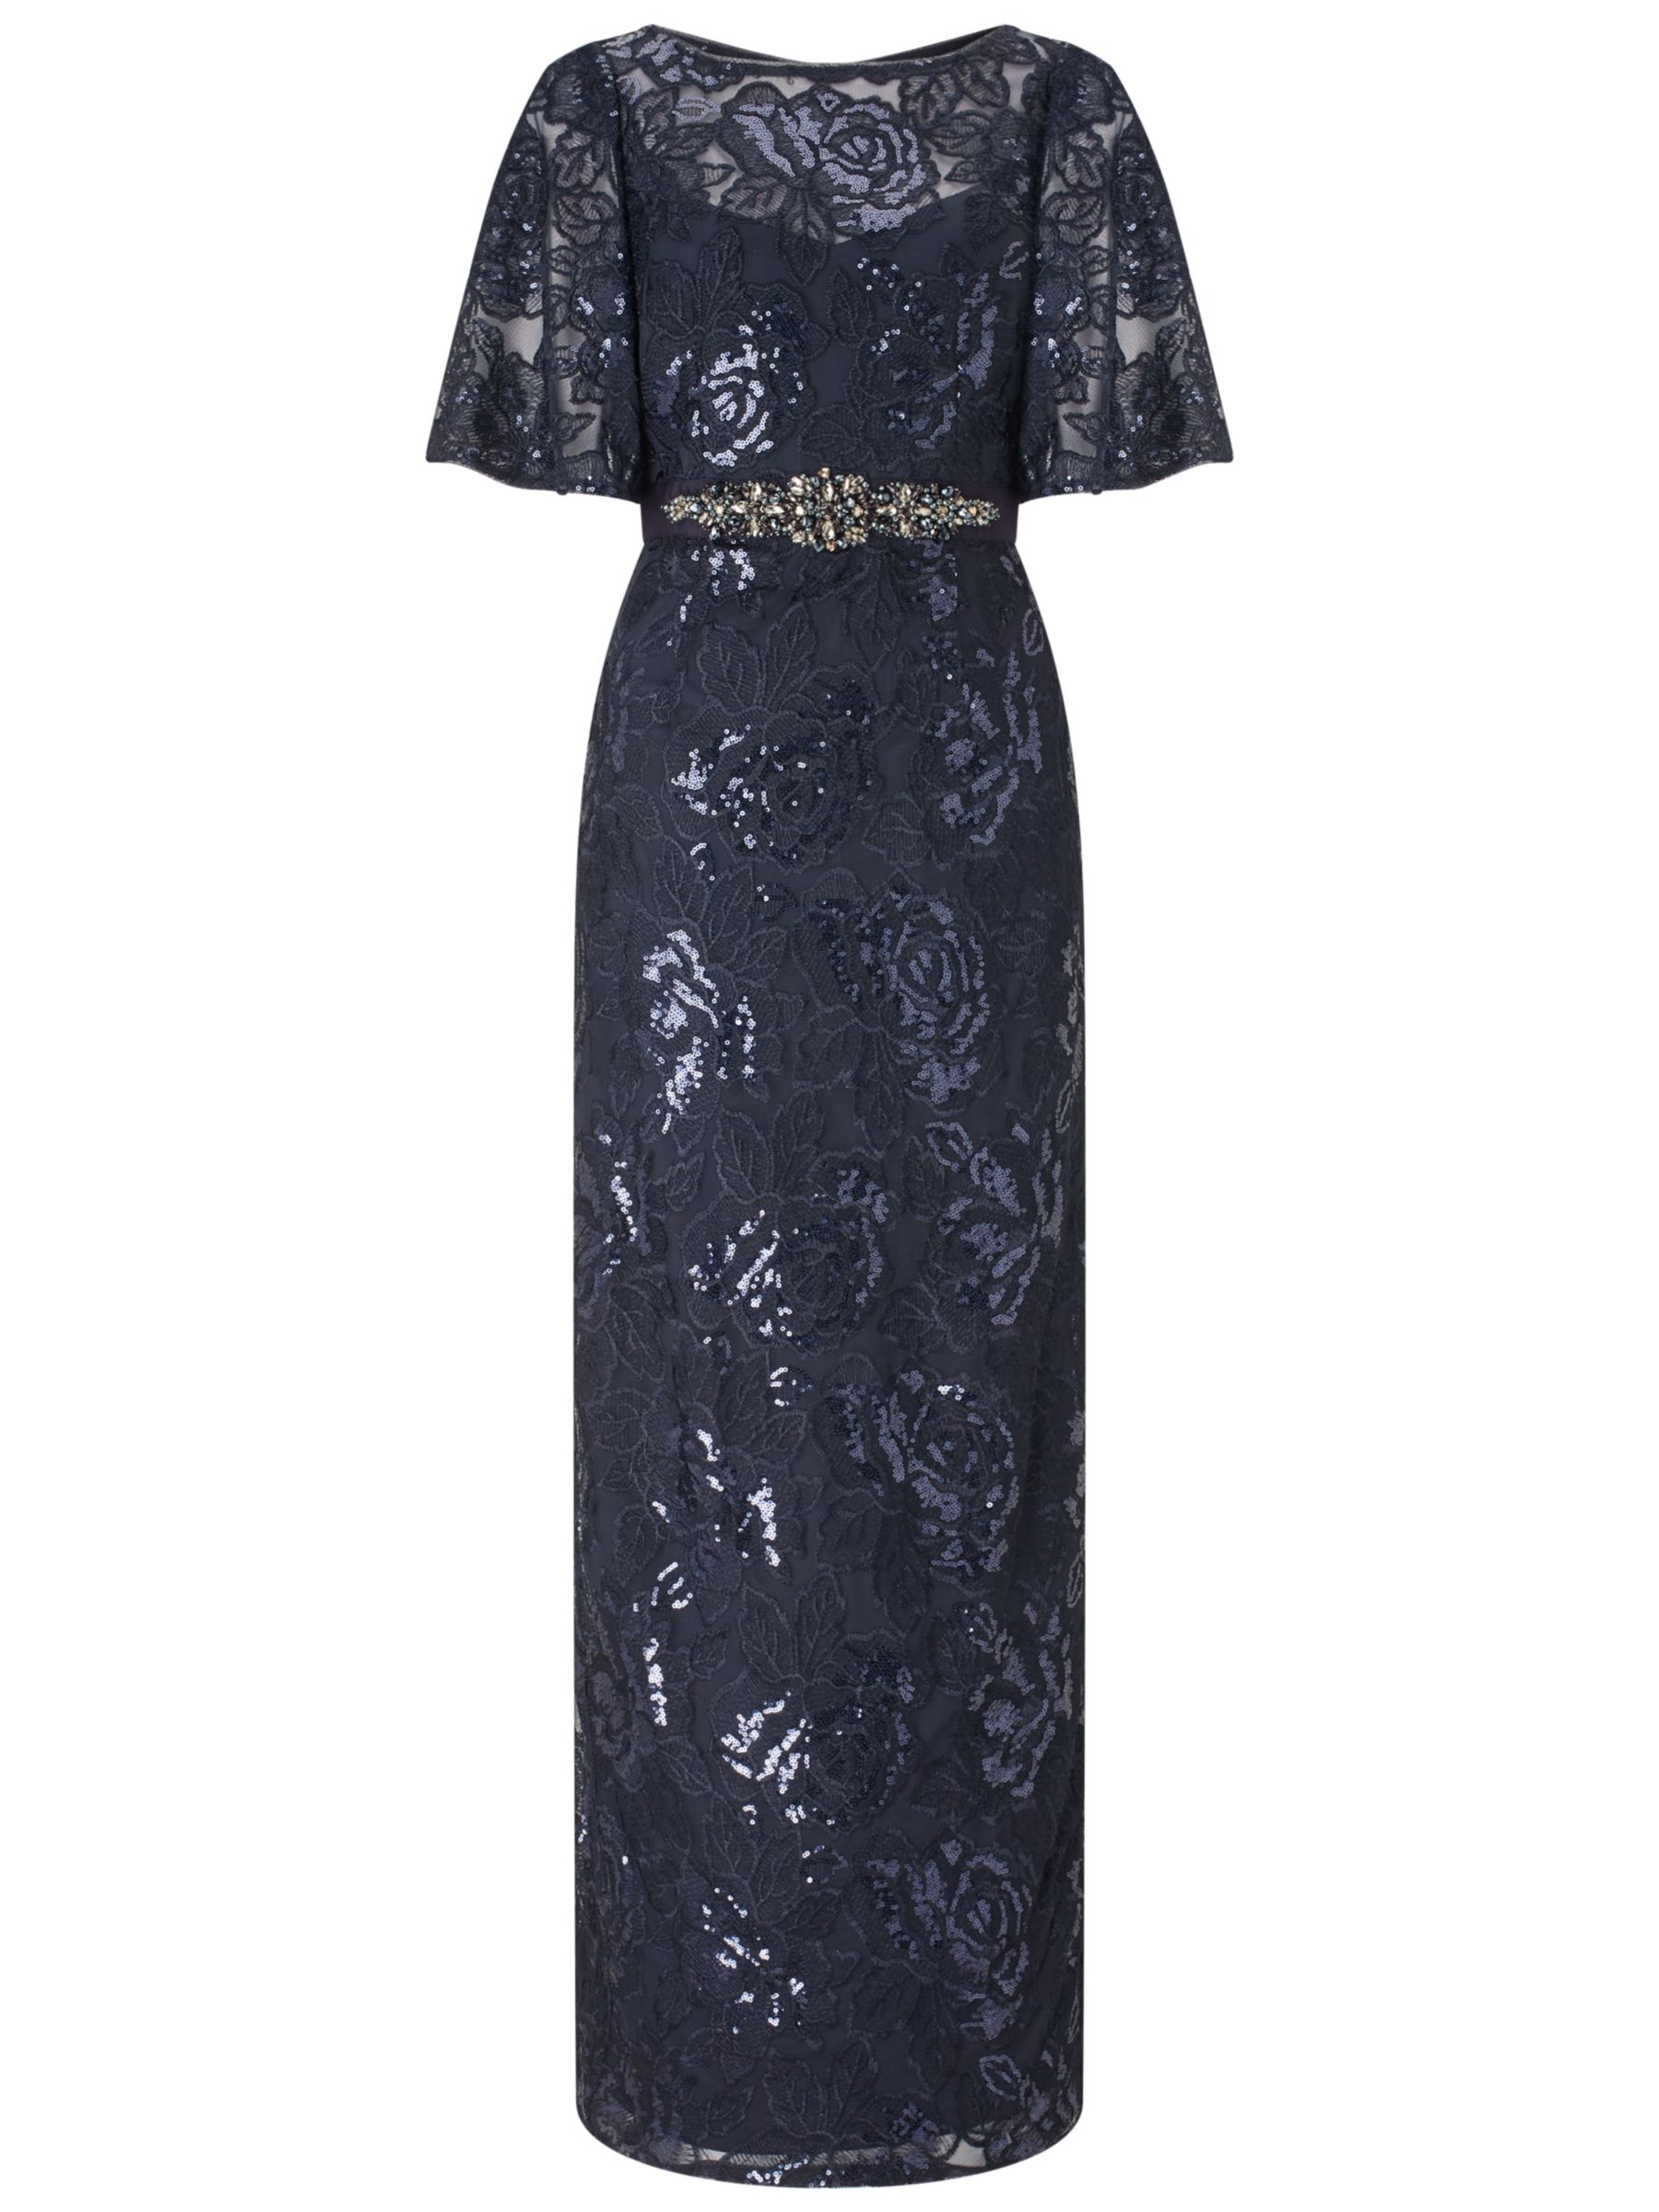 Adrianna Papell Sequin Embroidered Dress, Midnight